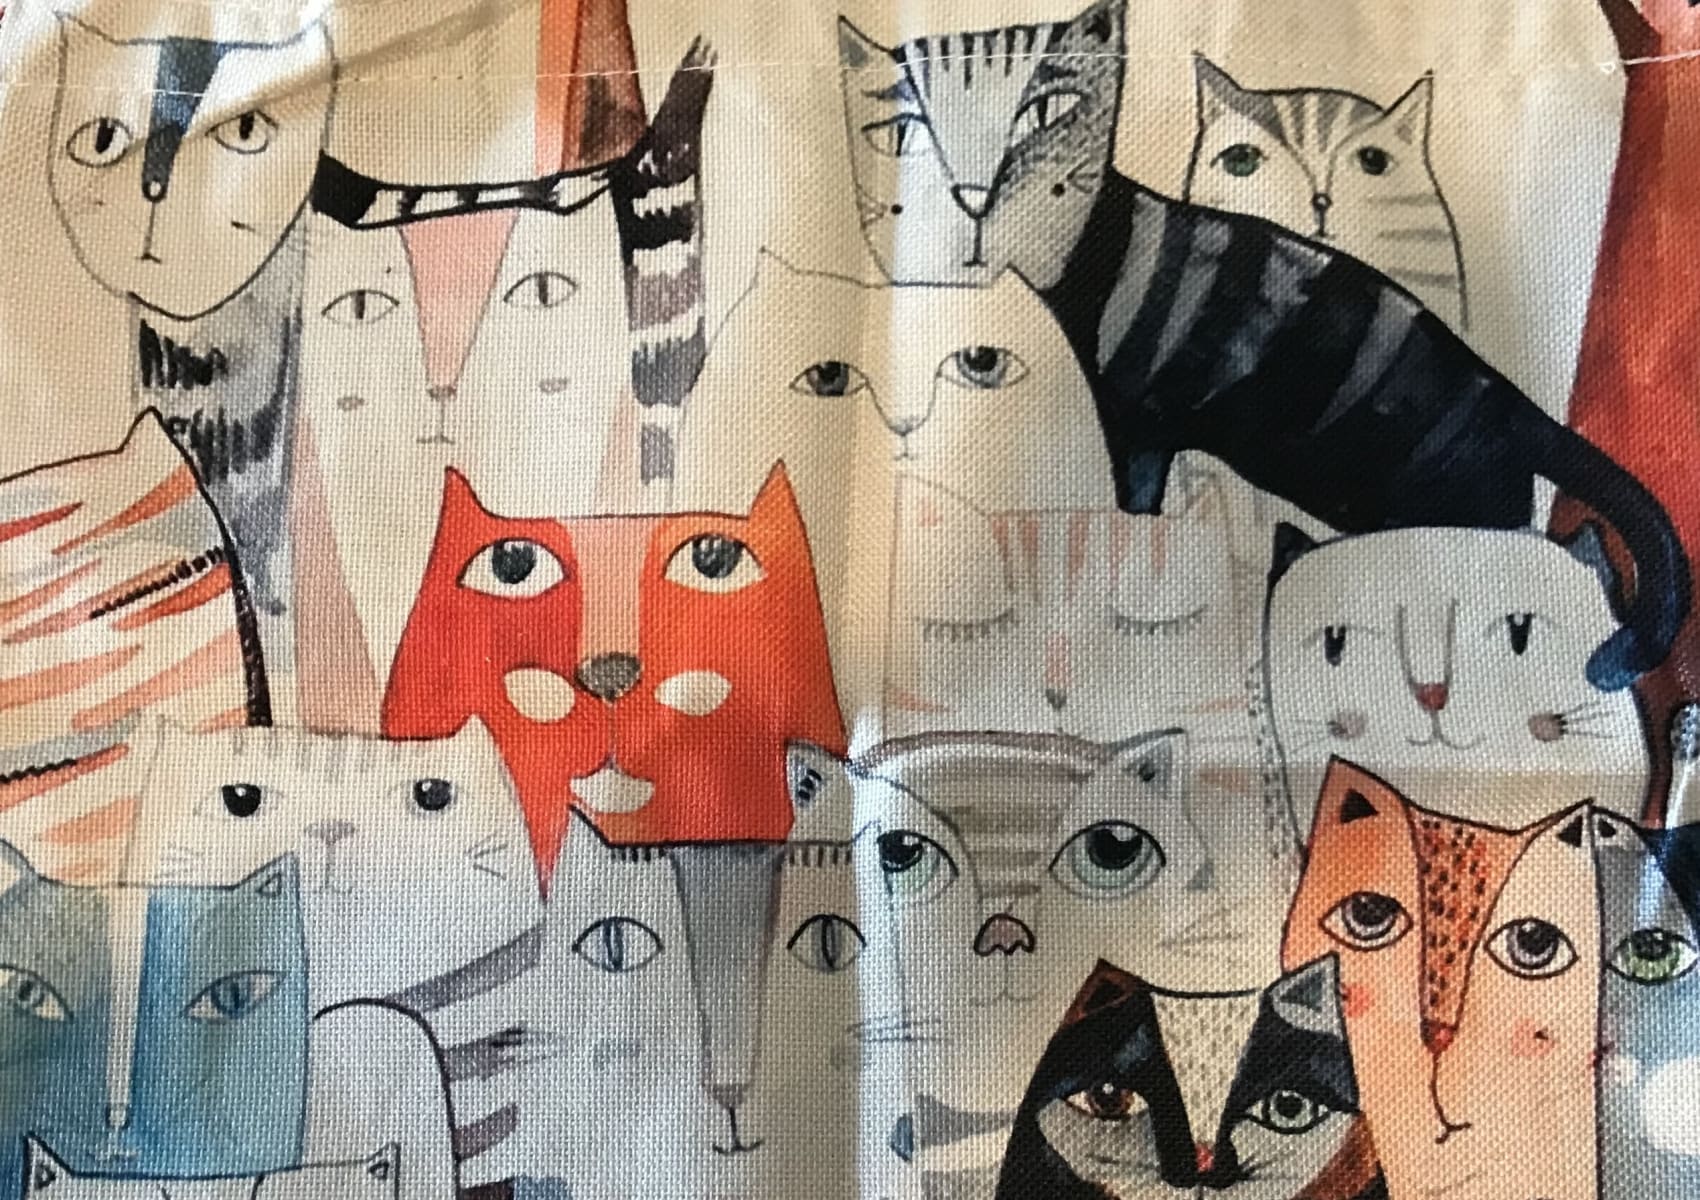 Tote bag with many cats faces